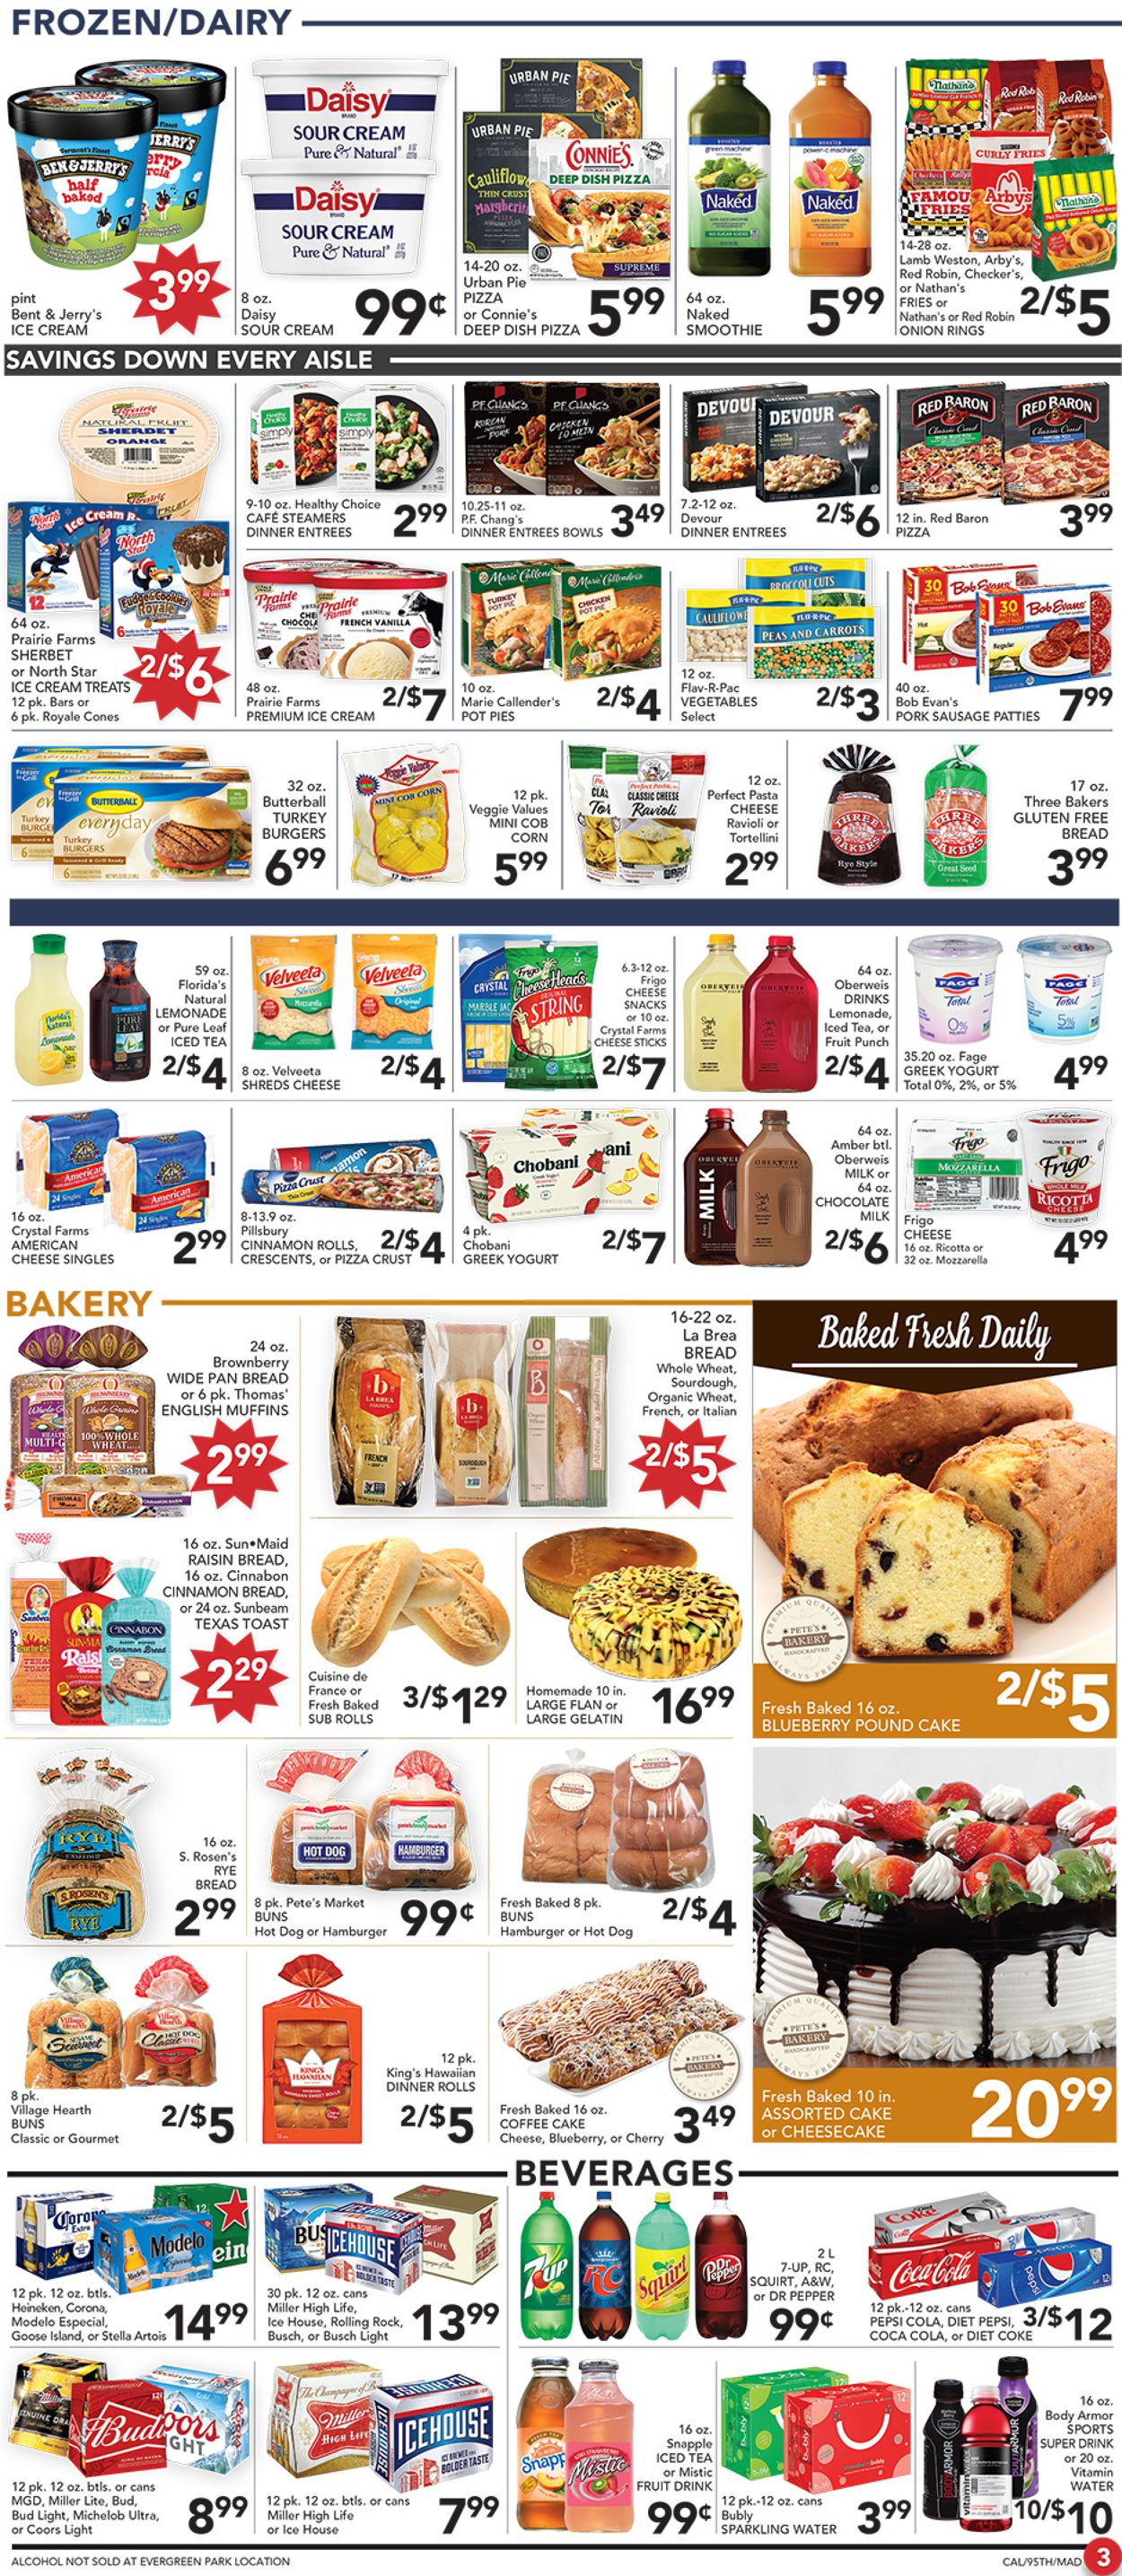 Catalogue Pete's Fresh Market from 08/26/2020